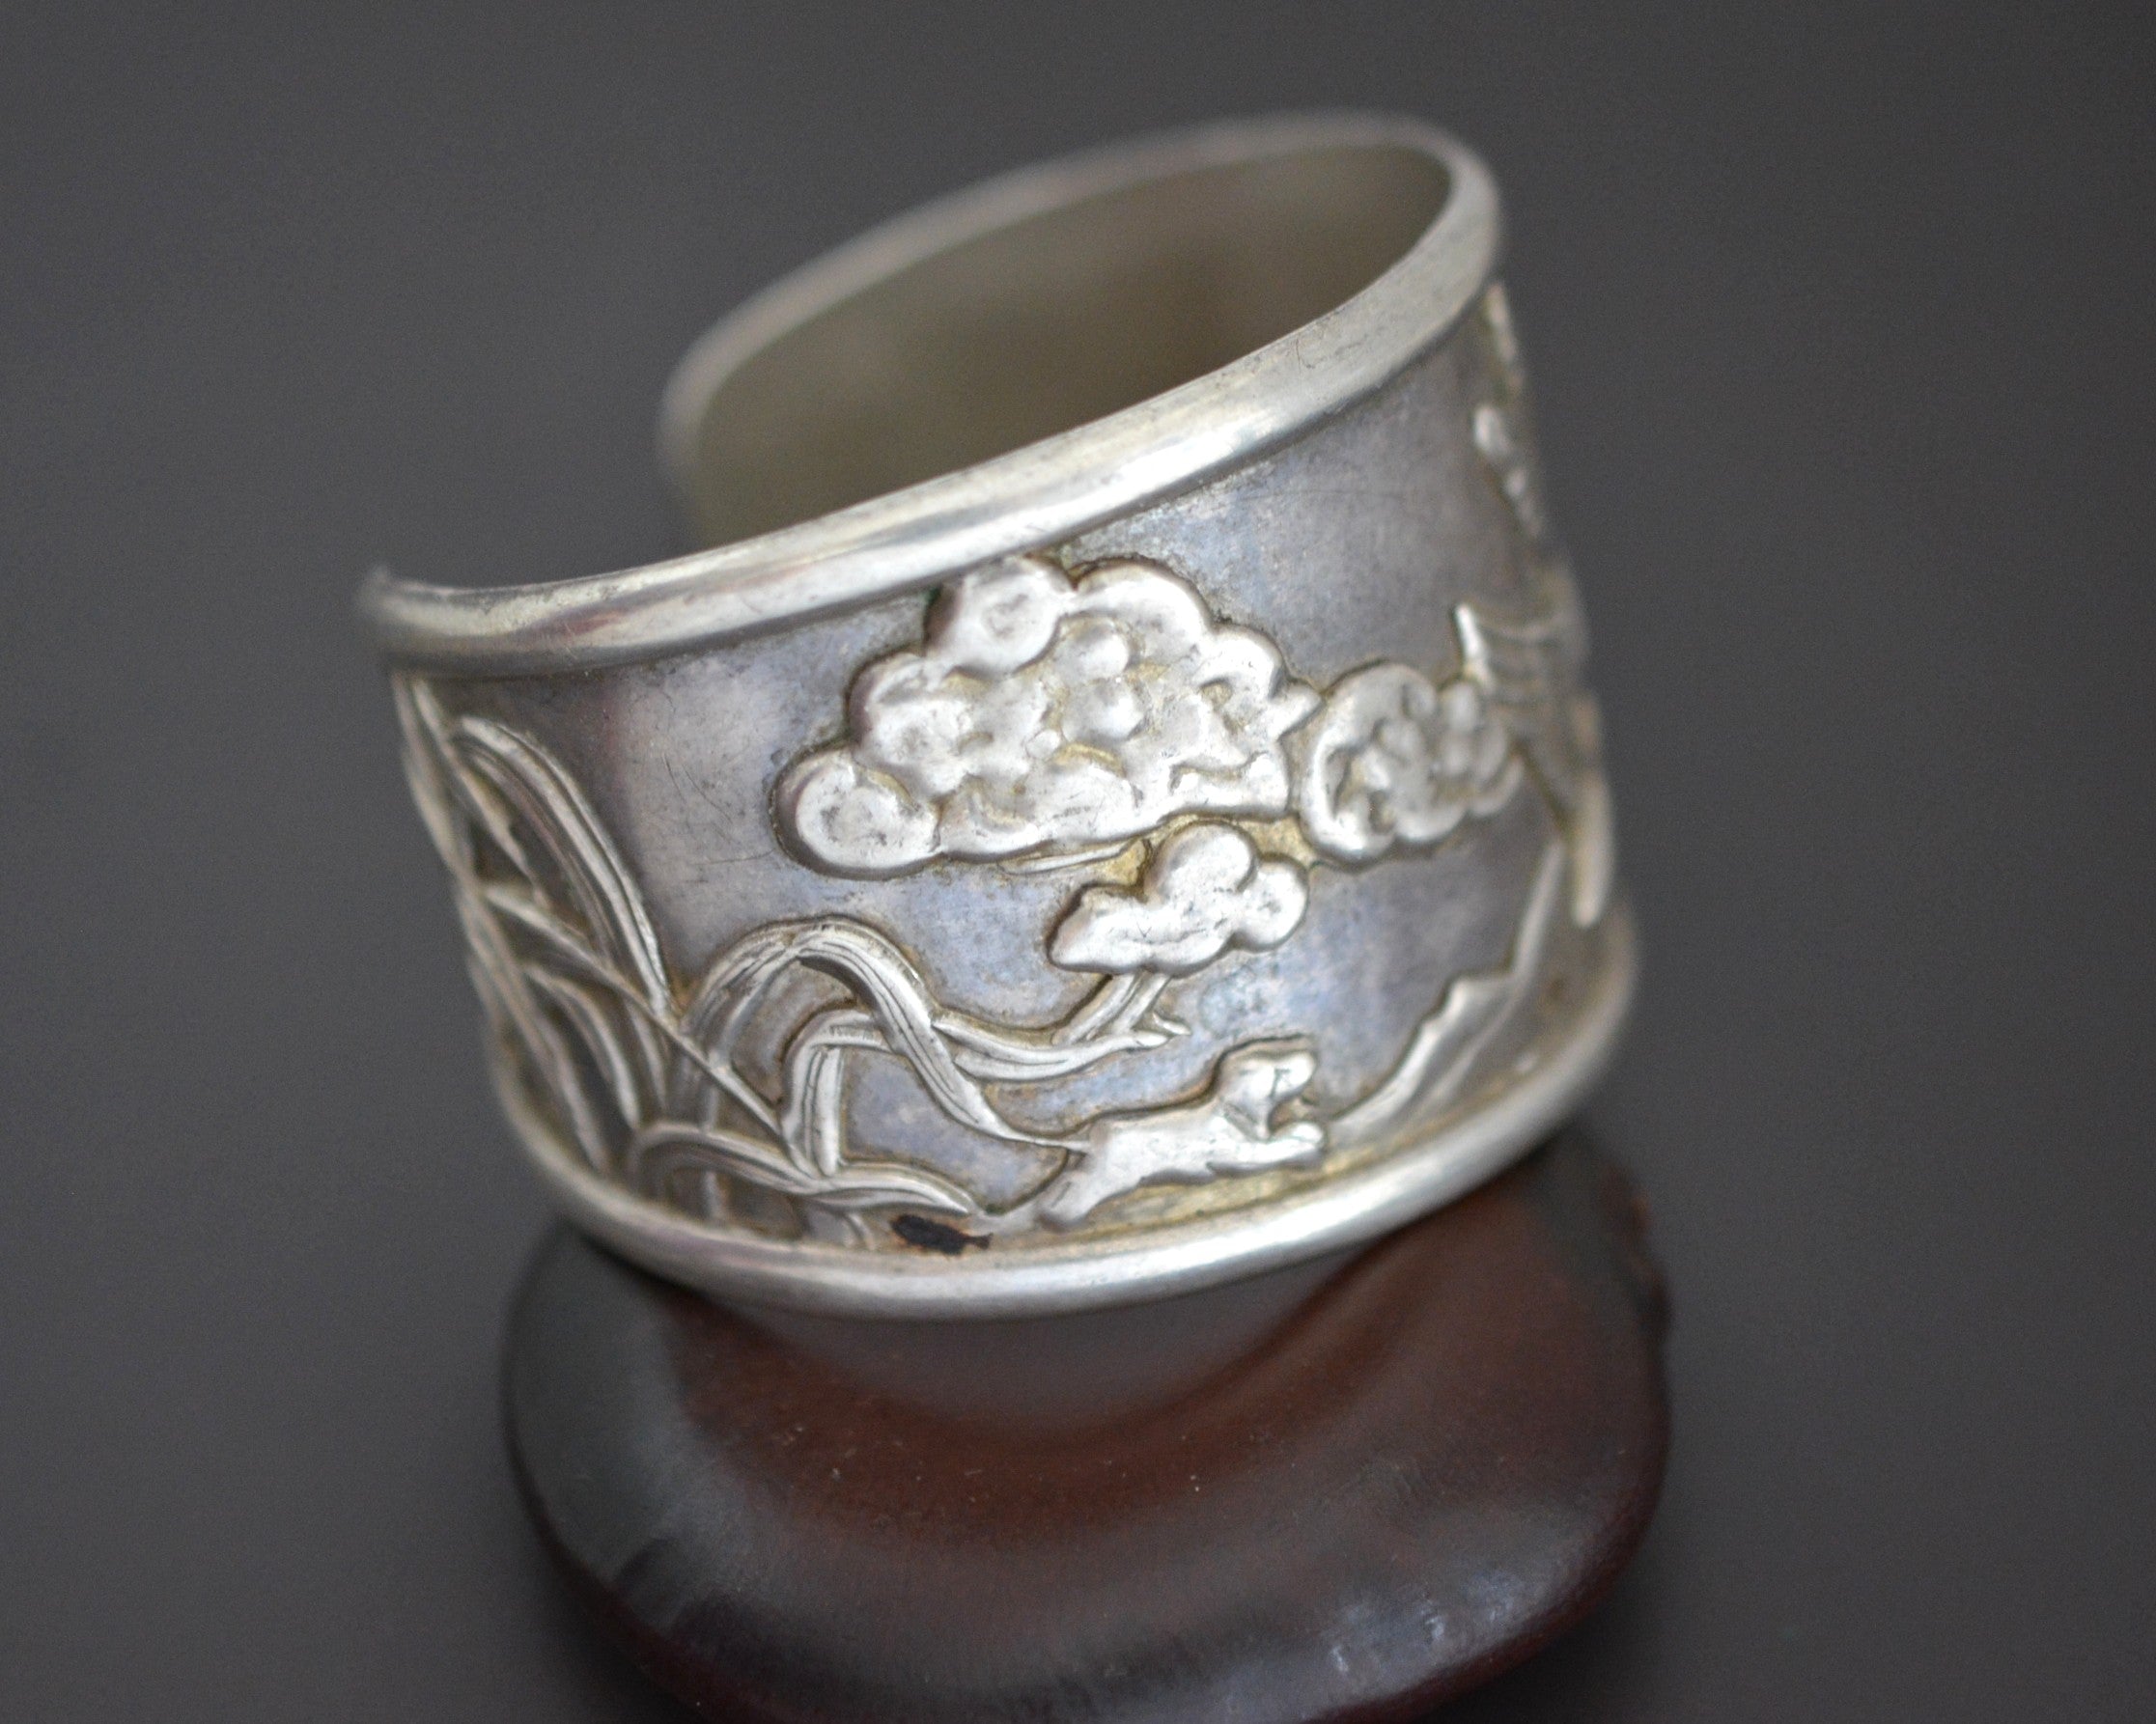 Ethnic Wide Cuff Bracelet with Nature and Cranes